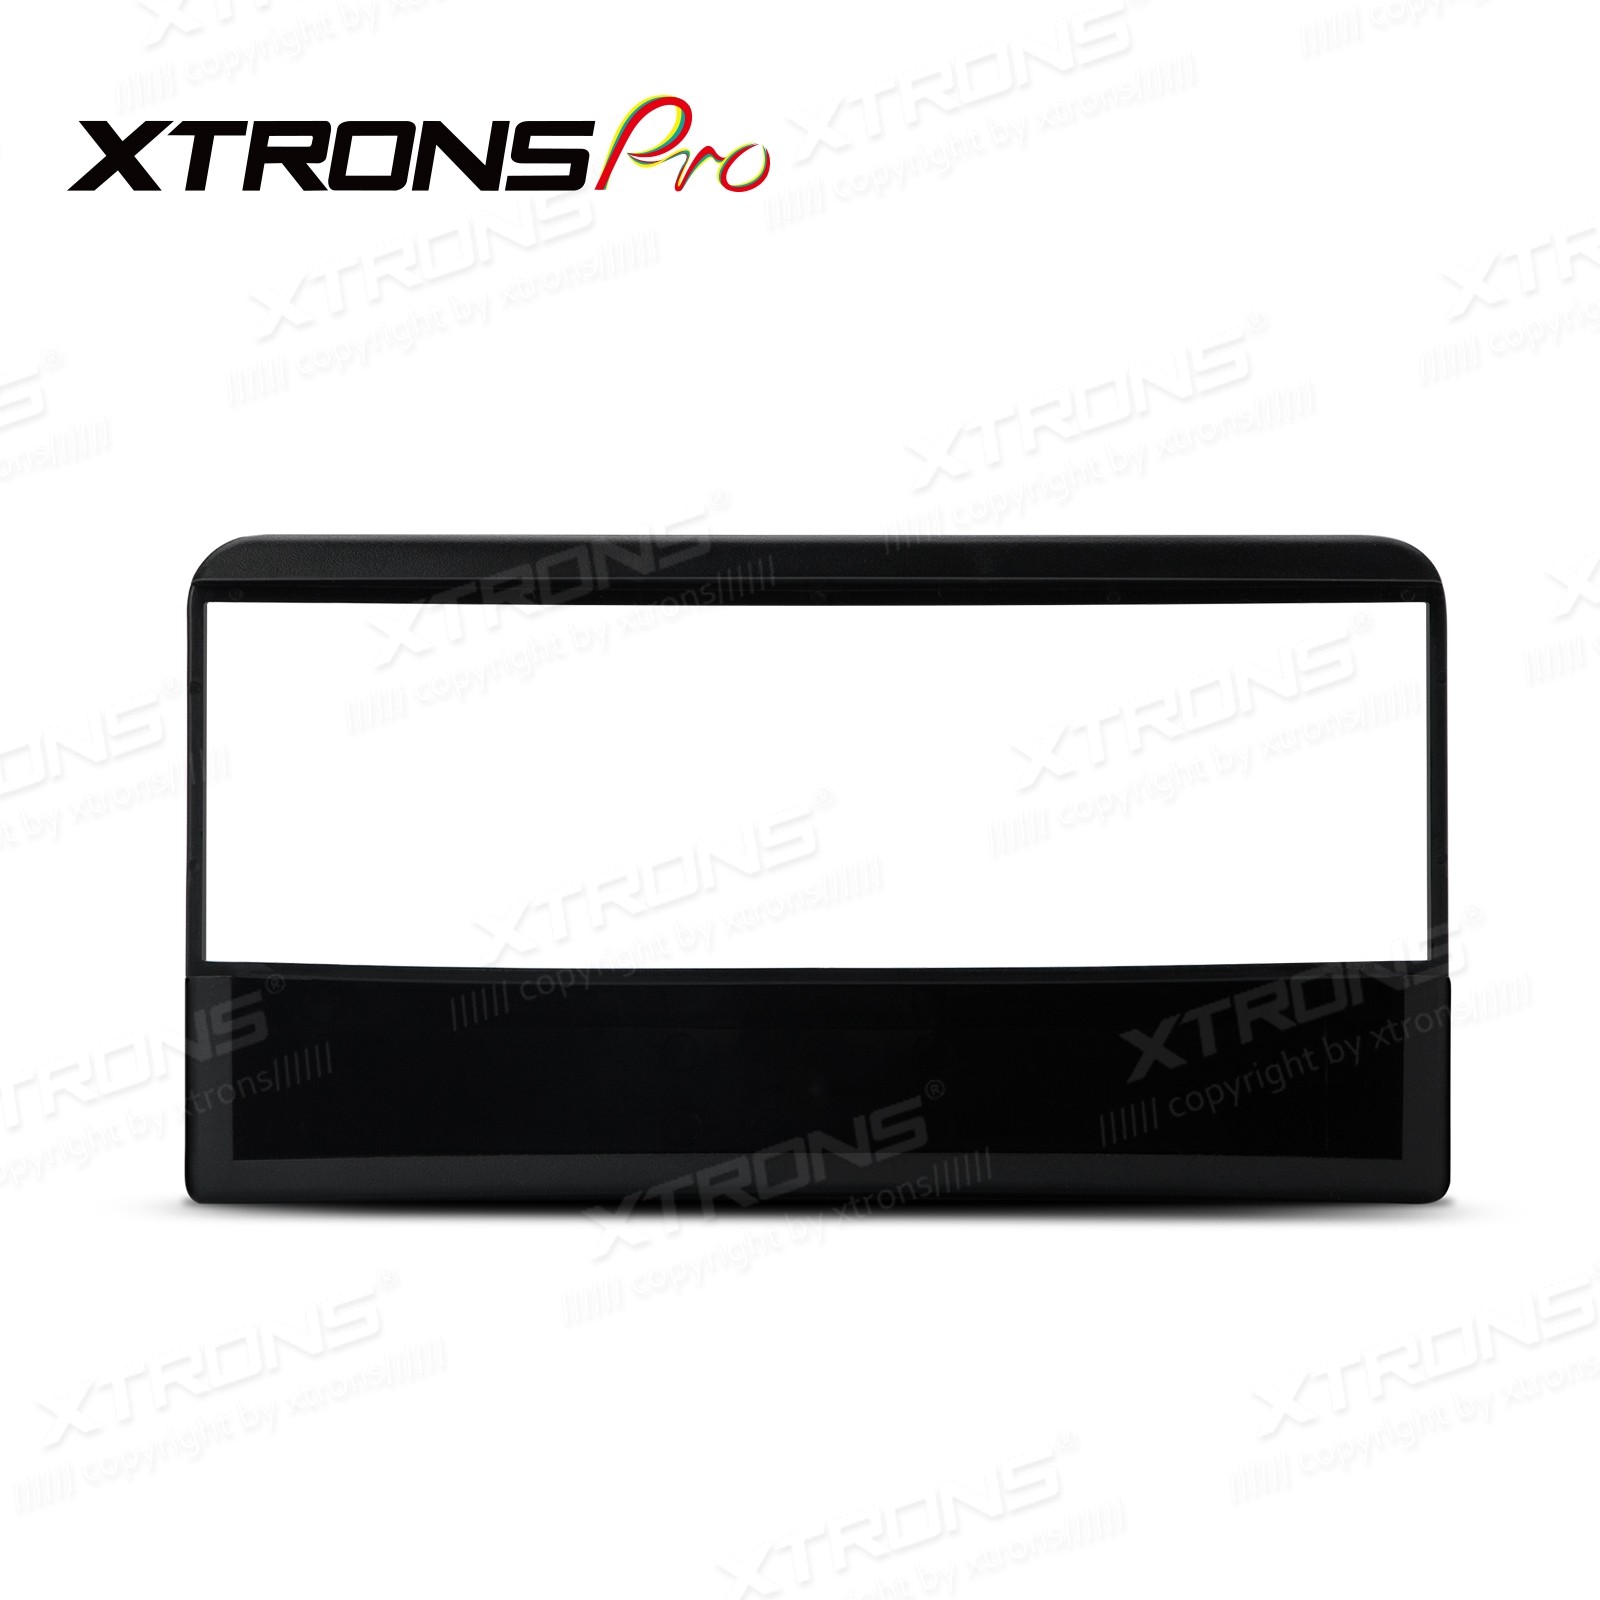 FORD Focus 1998-2004 | Galaxy 2000-06 | Mondeo 1996-2003 | Escape | Transit 2000-05 / JAGUAR S-Type 1999-2006 1-DIN Car Stereo  Din Facia Panel Fitting Surround XTRONS PRO 11-048